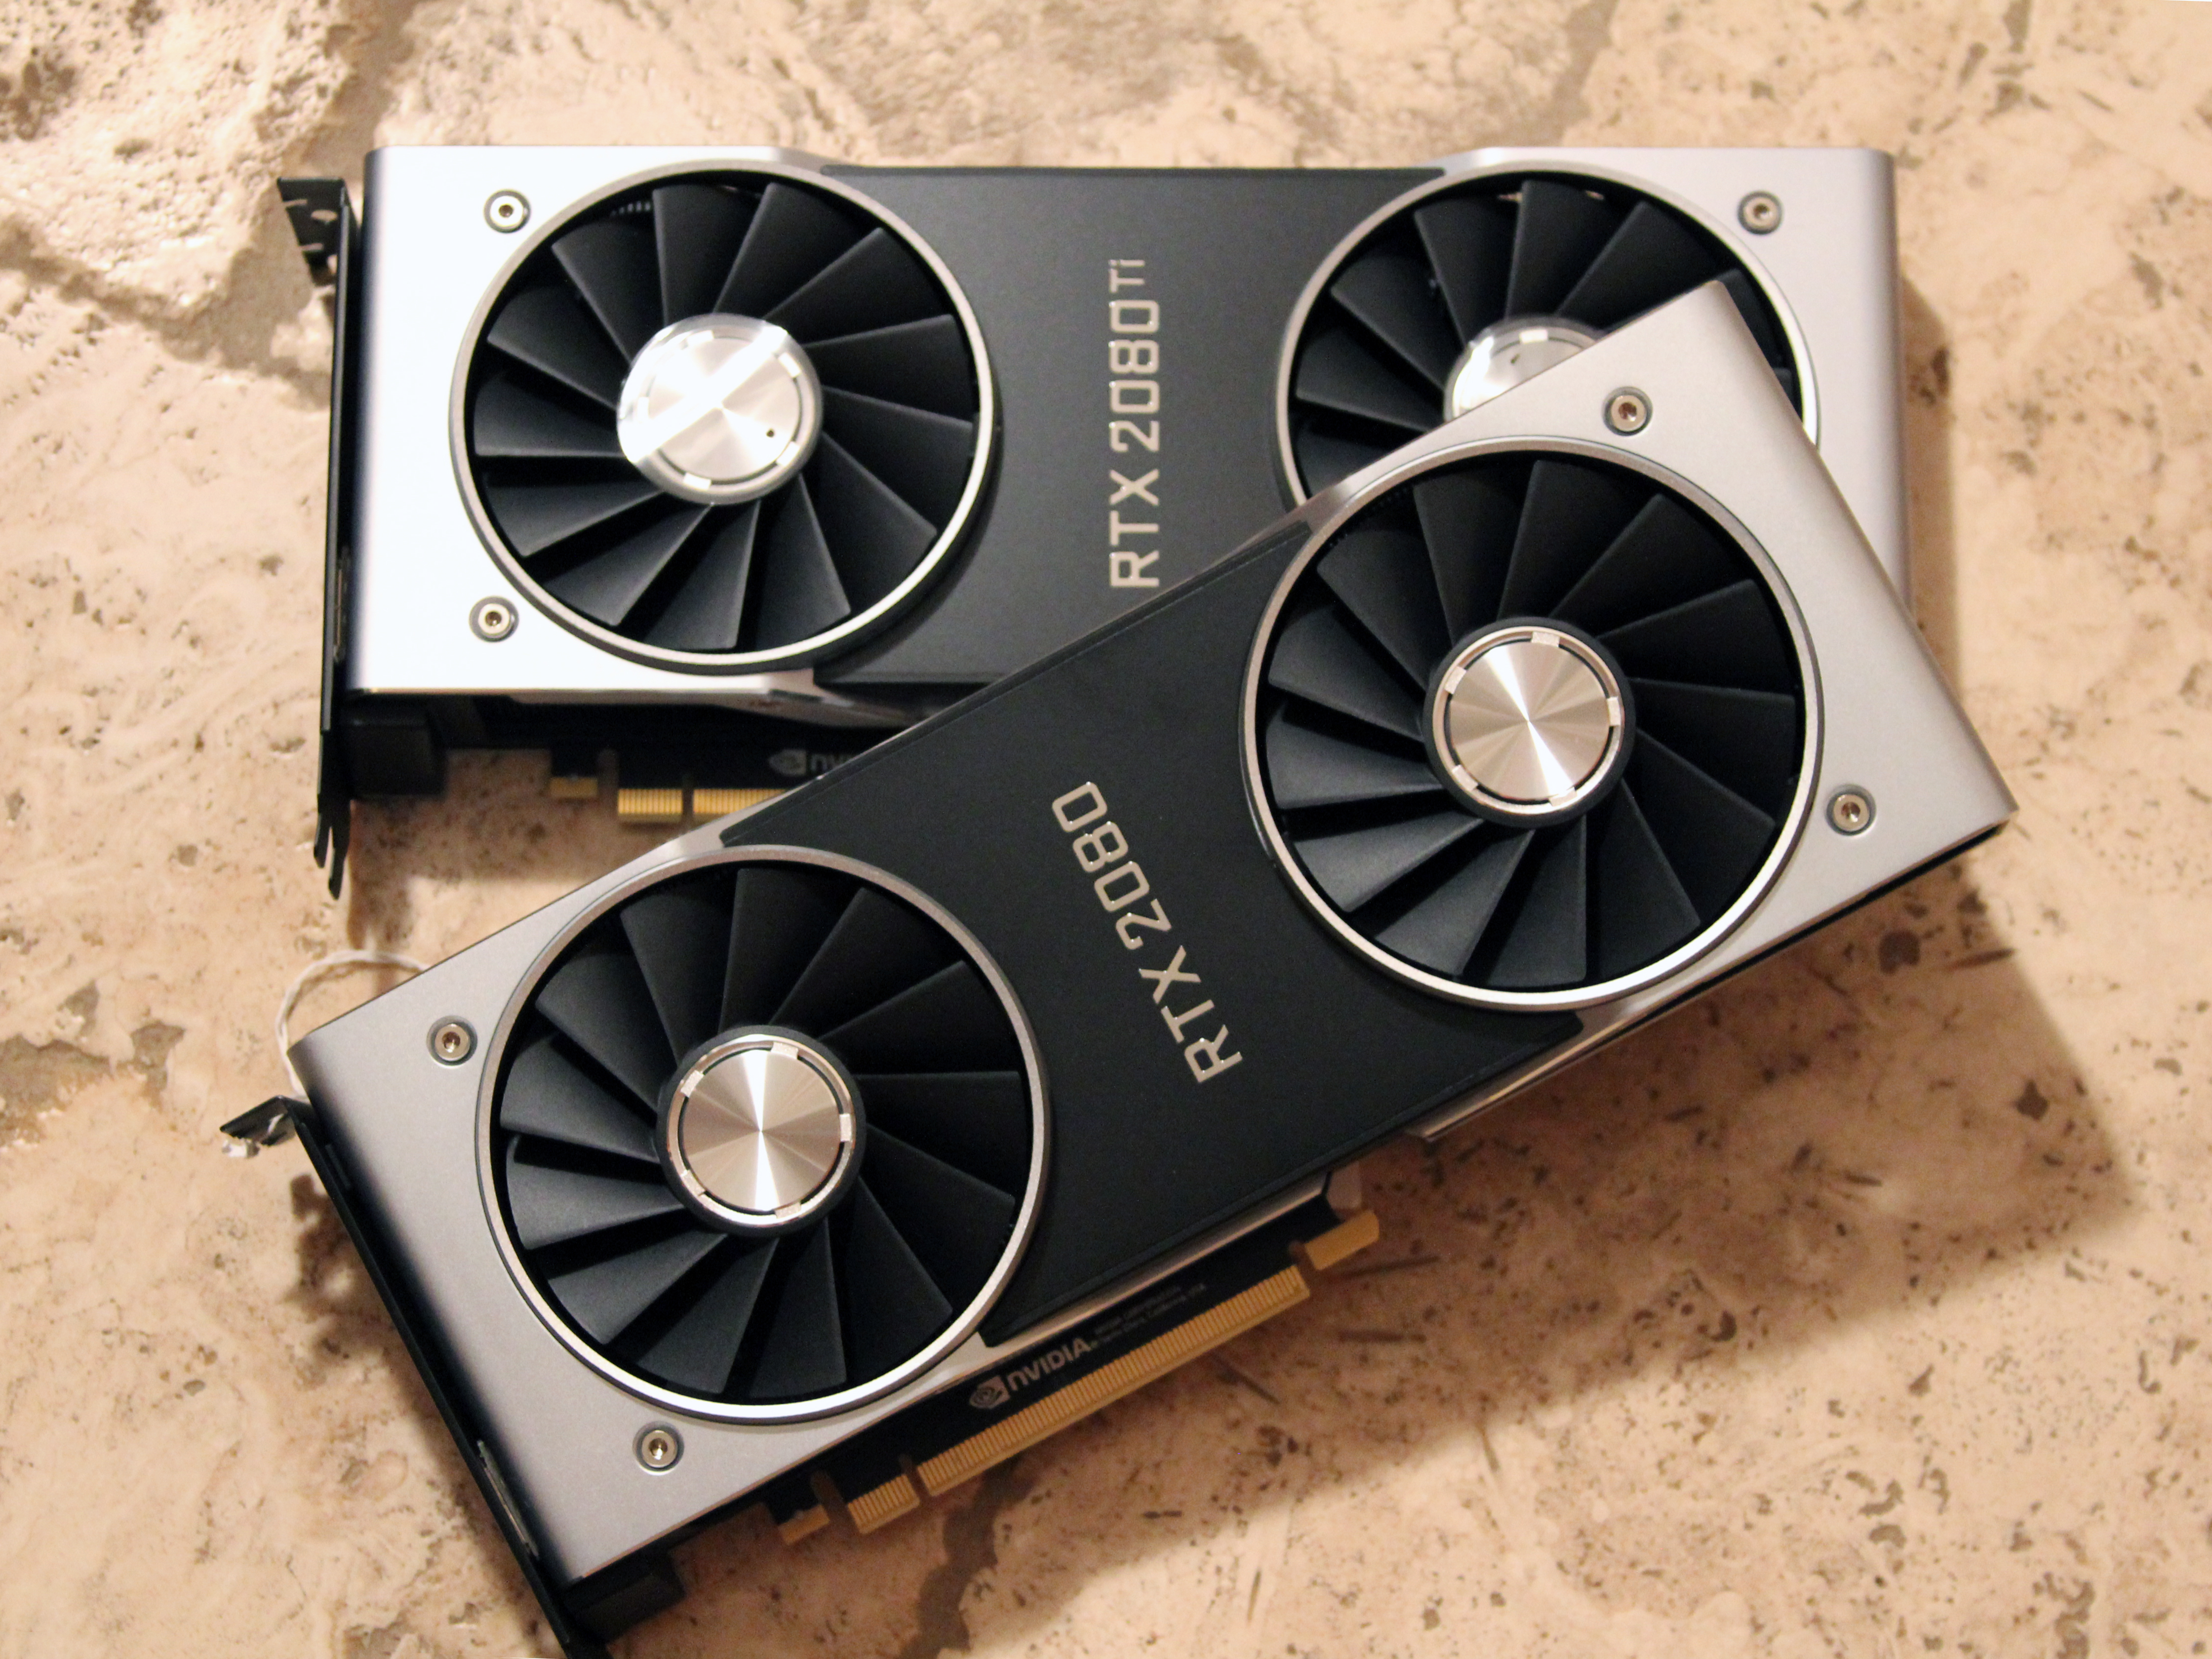 RTX 2080 Ti Owners Complain of Defects, Nvidia Responds (Update